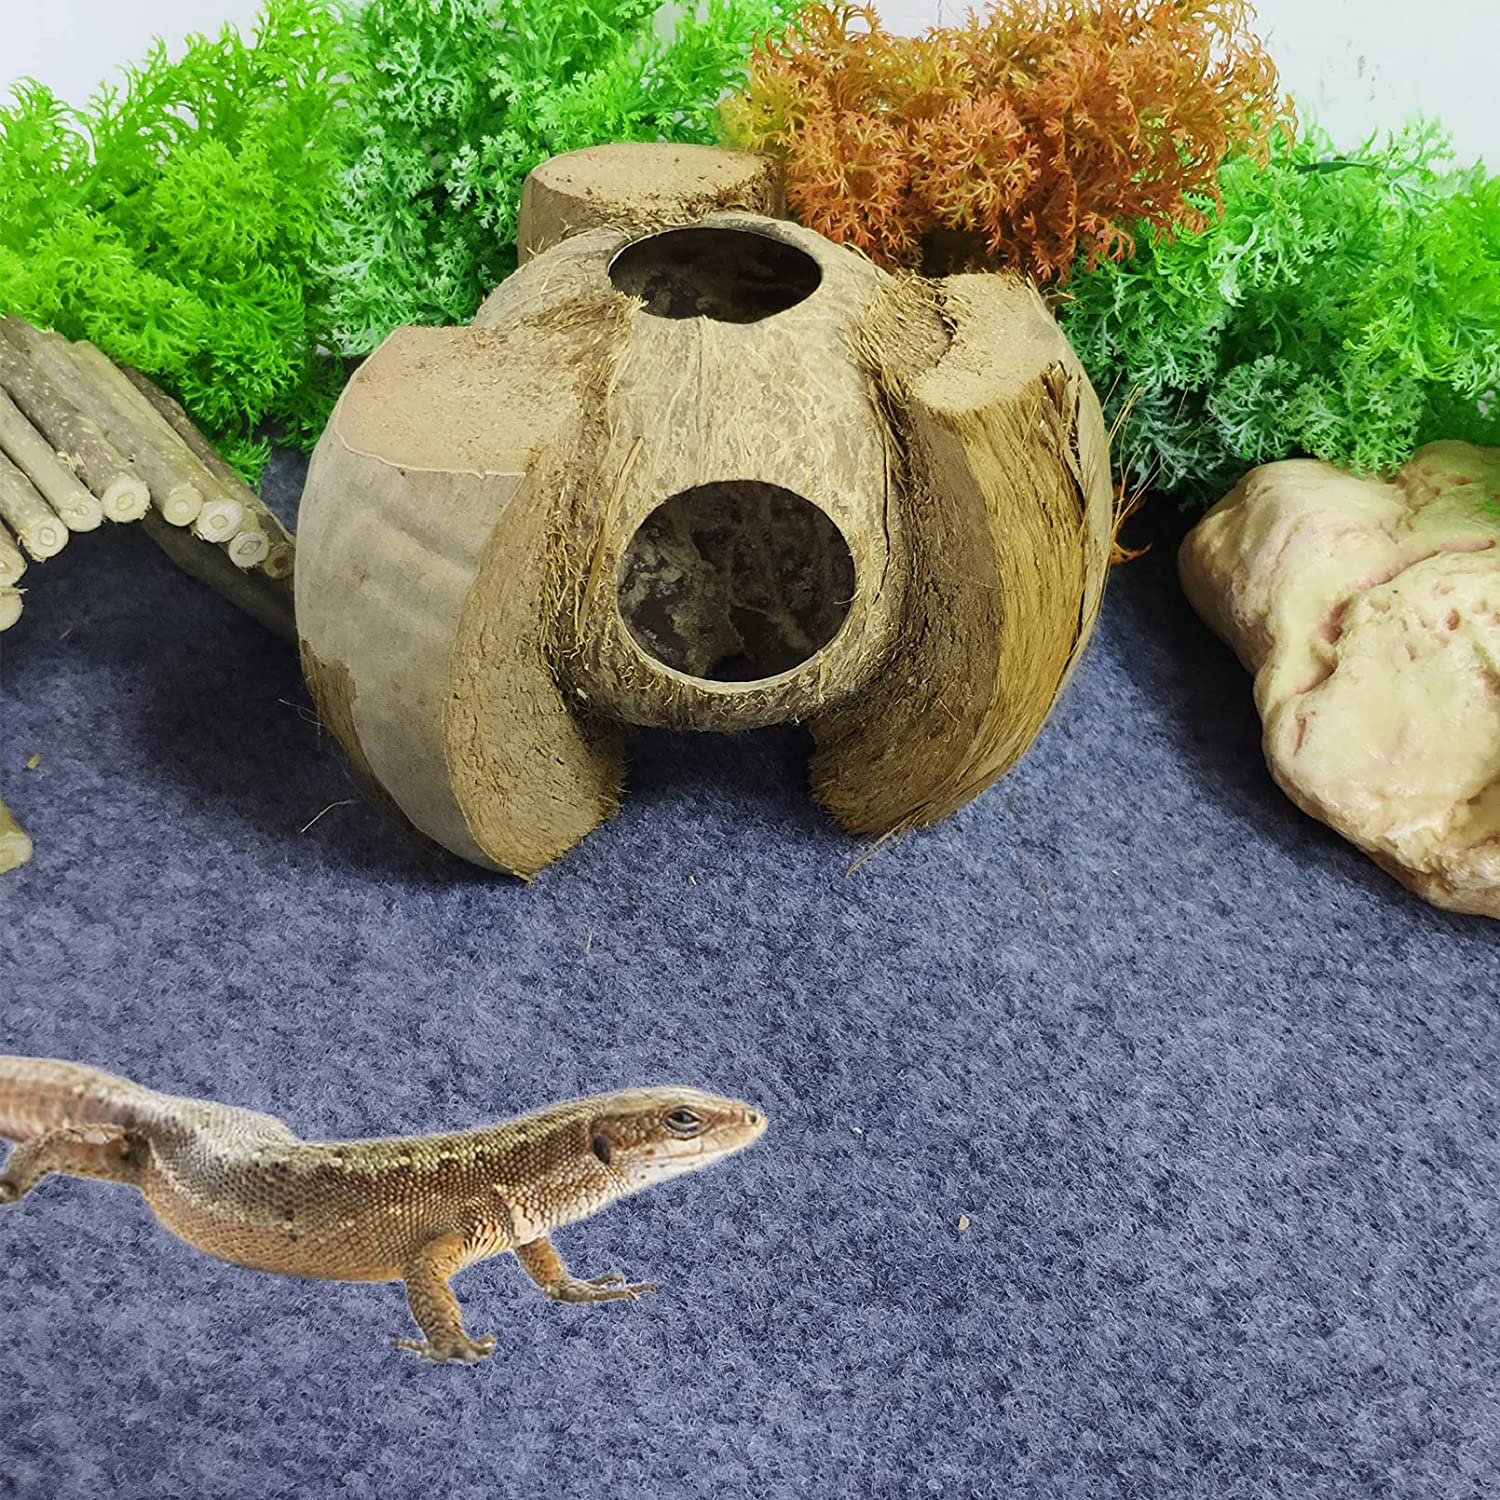 Hamiledyi Reptile Coconut Shell Hideout 5 Pack Lizard Coco Hut Durable Cave Habitat Jungle Climber Vines Flexible Plants Gecko Tank Accessories Decor for Chameleons Spiders Snakes Climbing Toys Animals & Pet Supplies > Pet Supplies > Reptile & Amphibian Supplies > Reptile & Amphibian Habitat Accessories Hamiledyi   